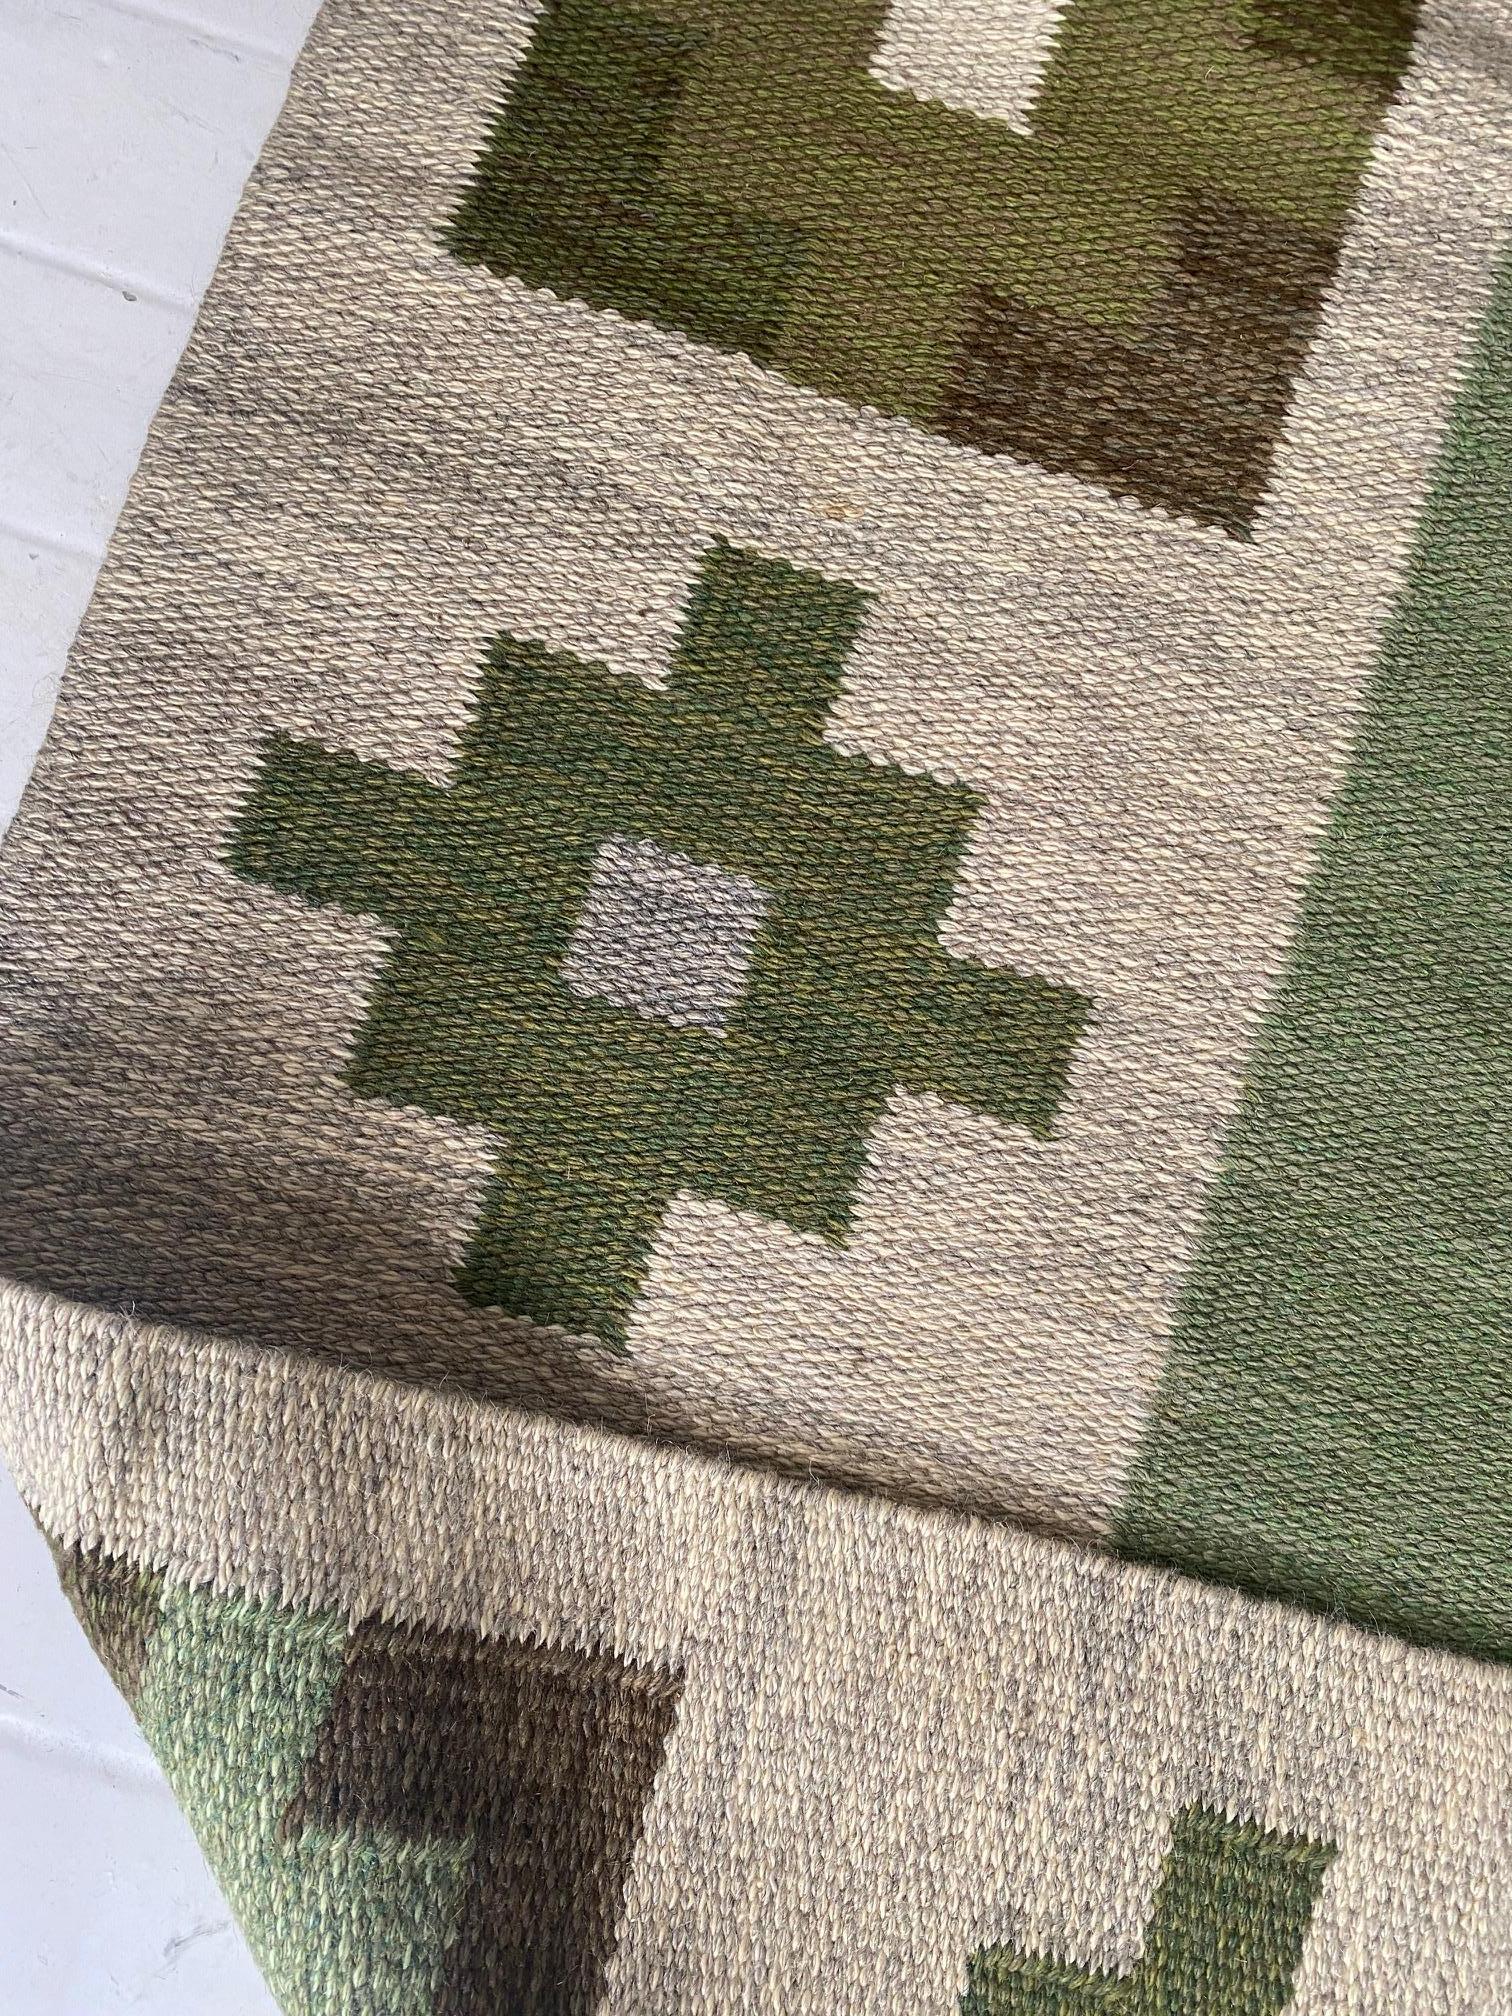 Hand-Knotted High-quality Vintage Swedish Beige, Green Flat Weave Wool Rug